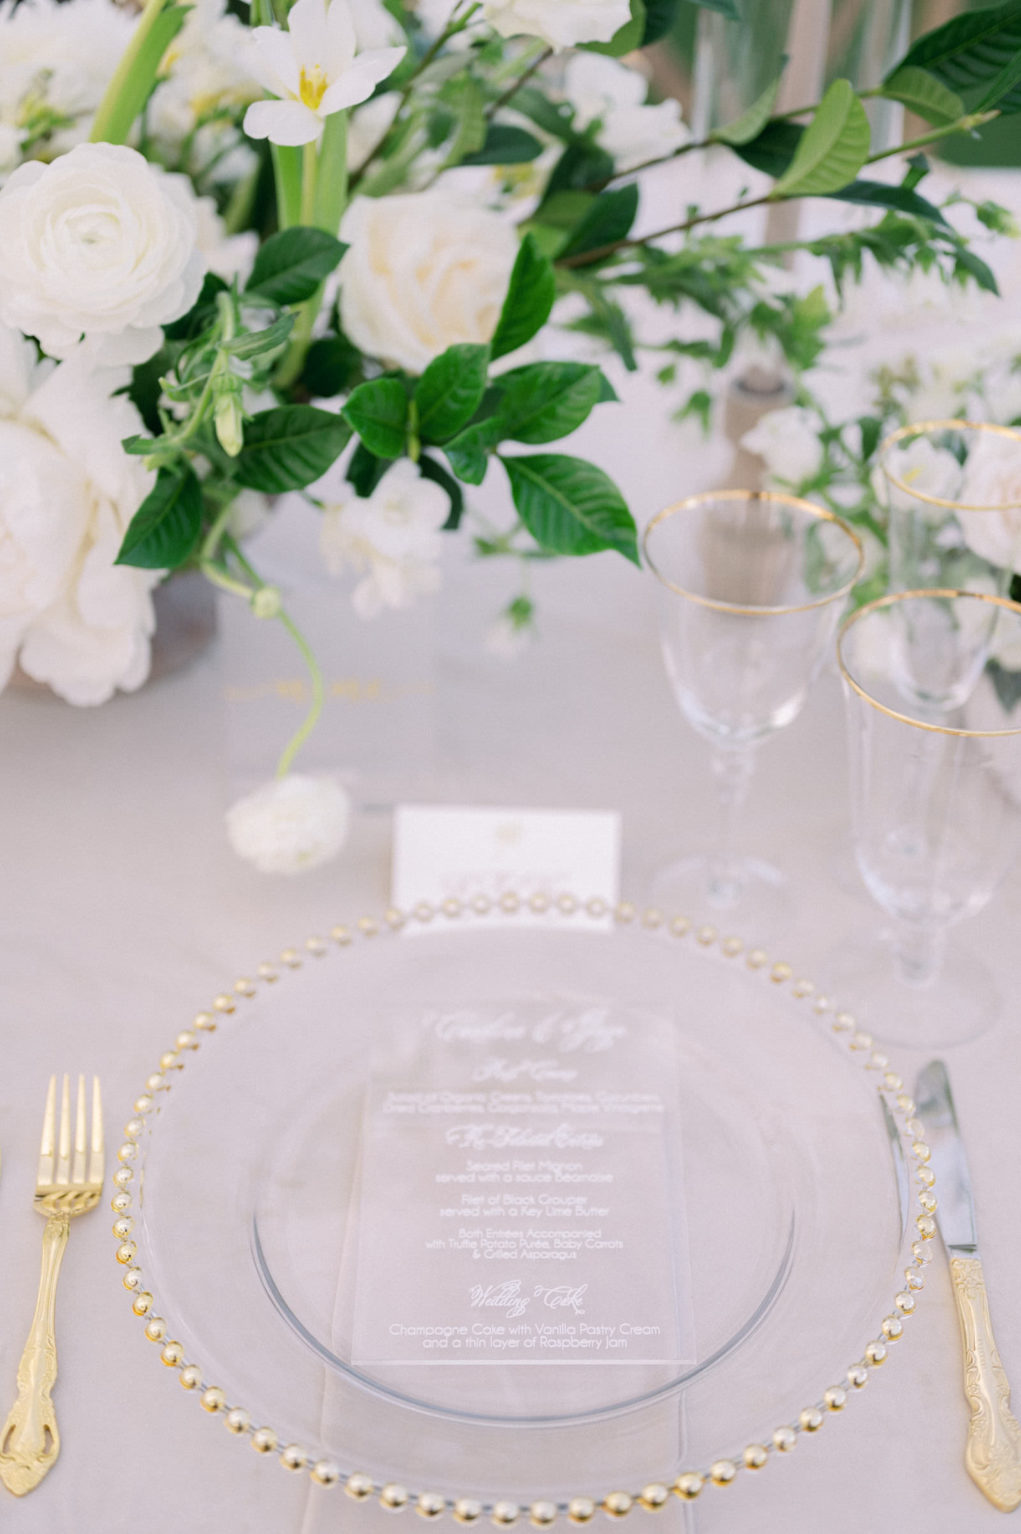 Luxurious Elegant Florida Classic Wedding Reception Decor, Gold Beaded and Clear Chargers, Gold Flatware, White Roses and Greenery Floral Centerpiece